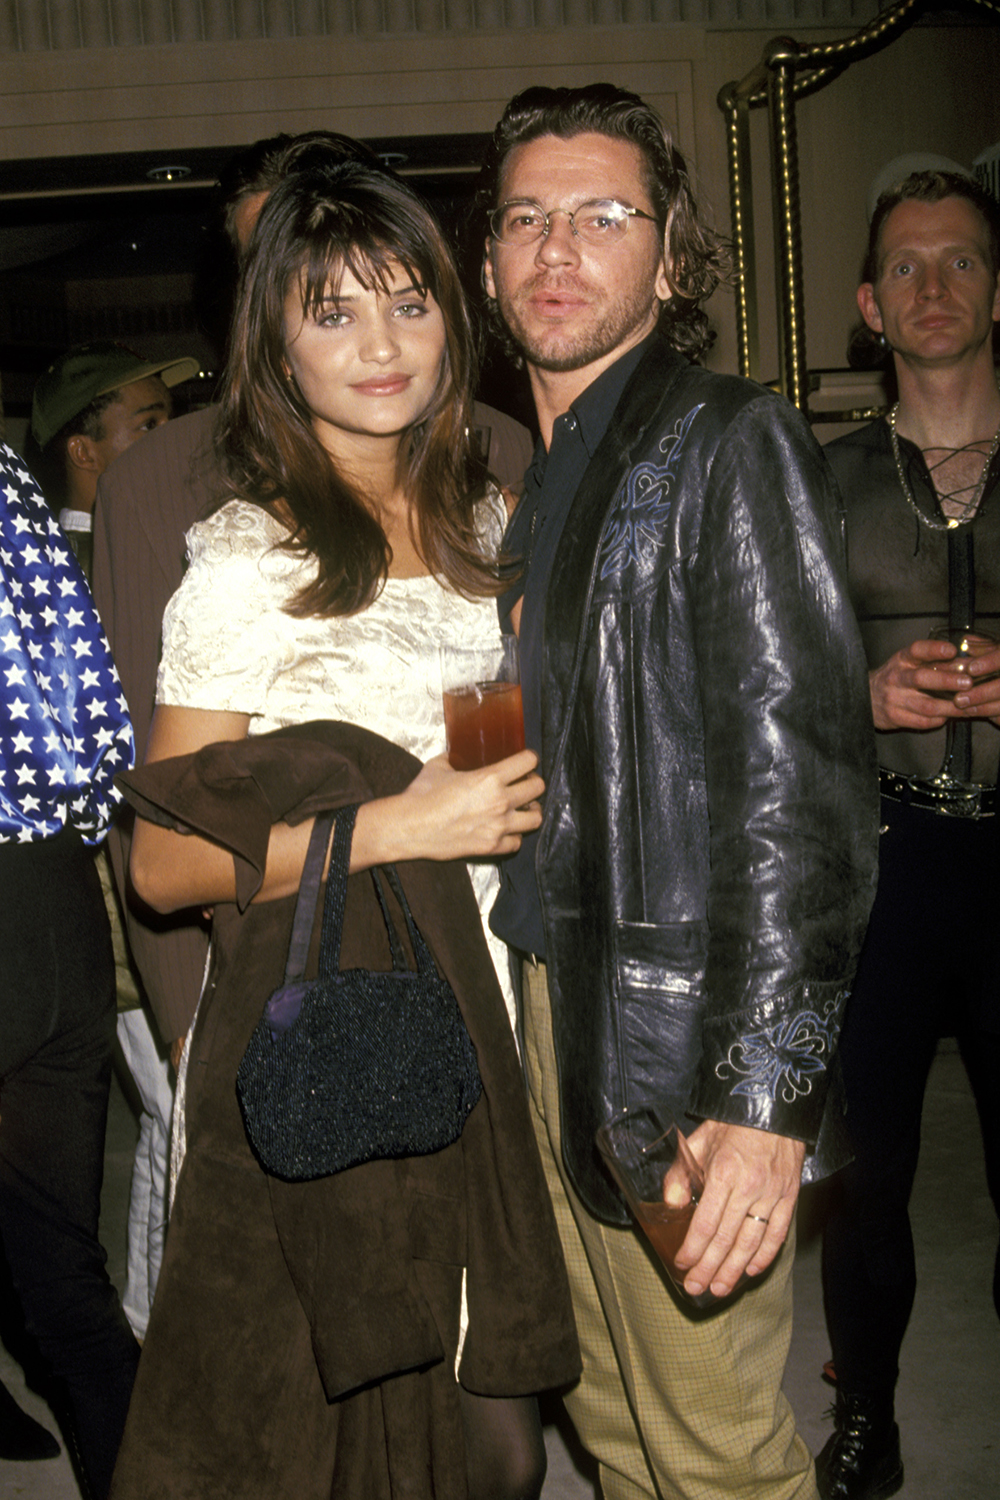 Helena Christensen dated INXS frontman Michael Hutchence for five years in the 1990s.